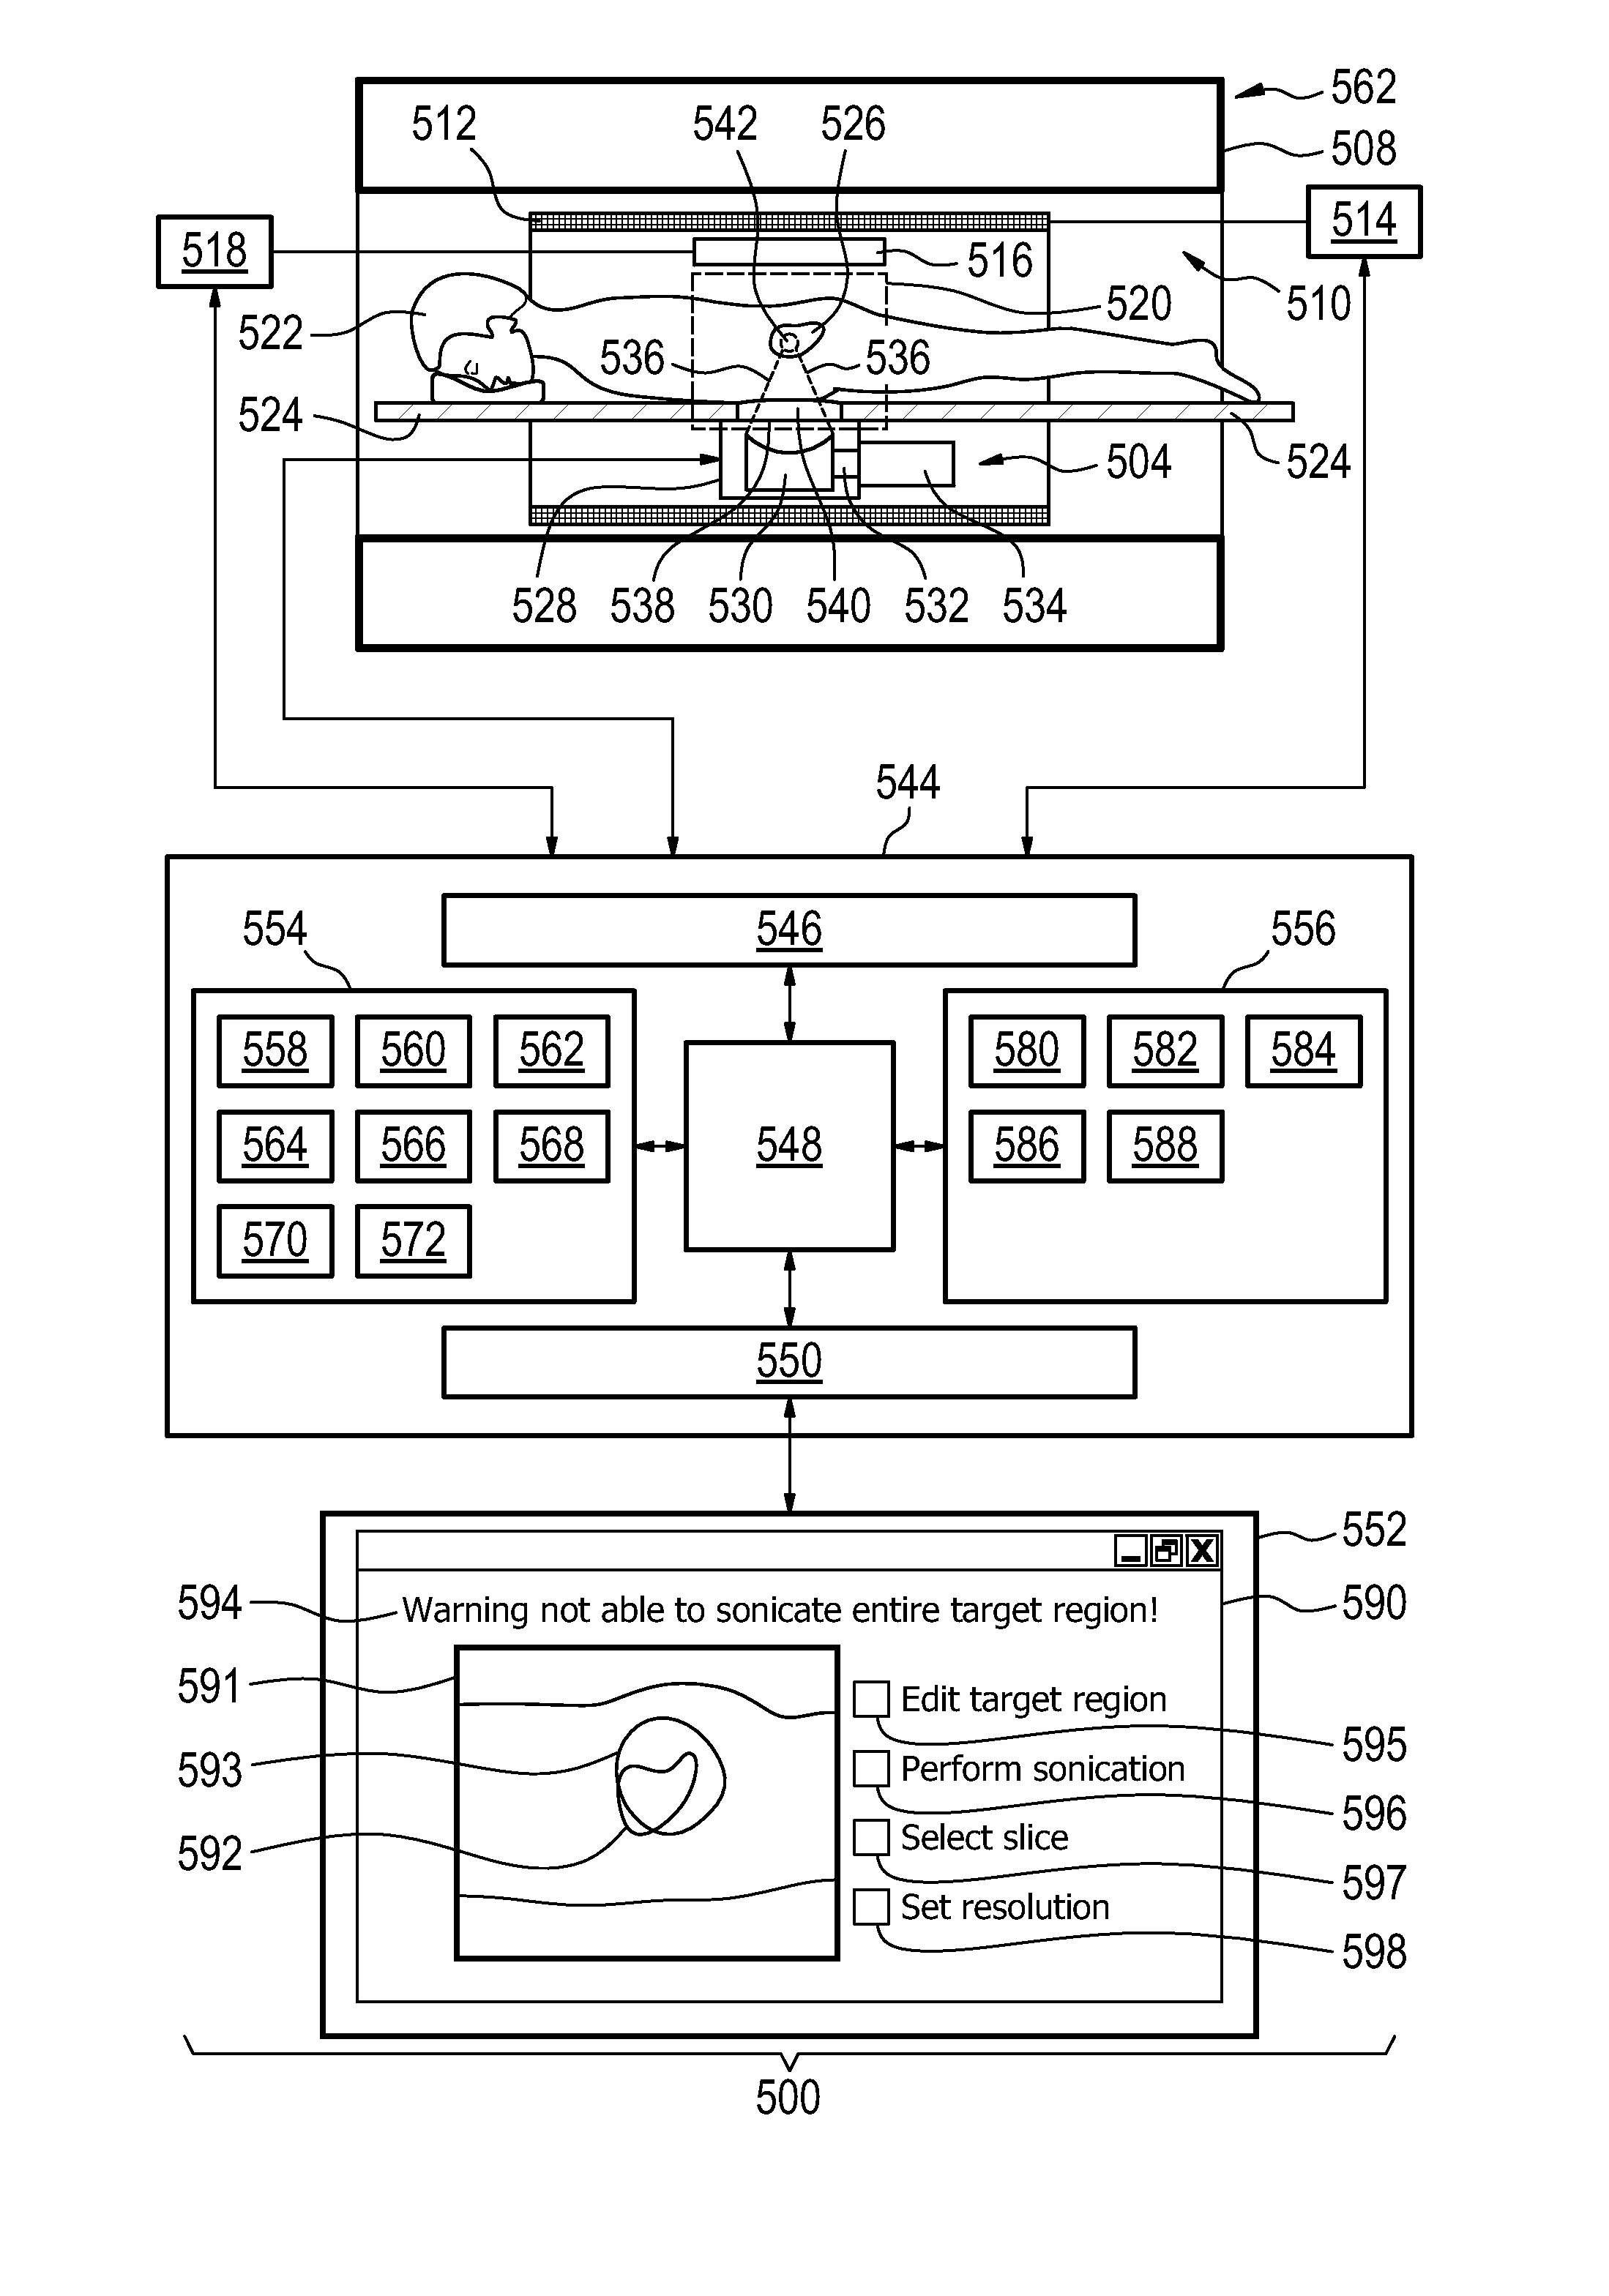 Therapeutic apparatus, computer program product, and method for determining an achievable target region for high intensity focused ultrasound